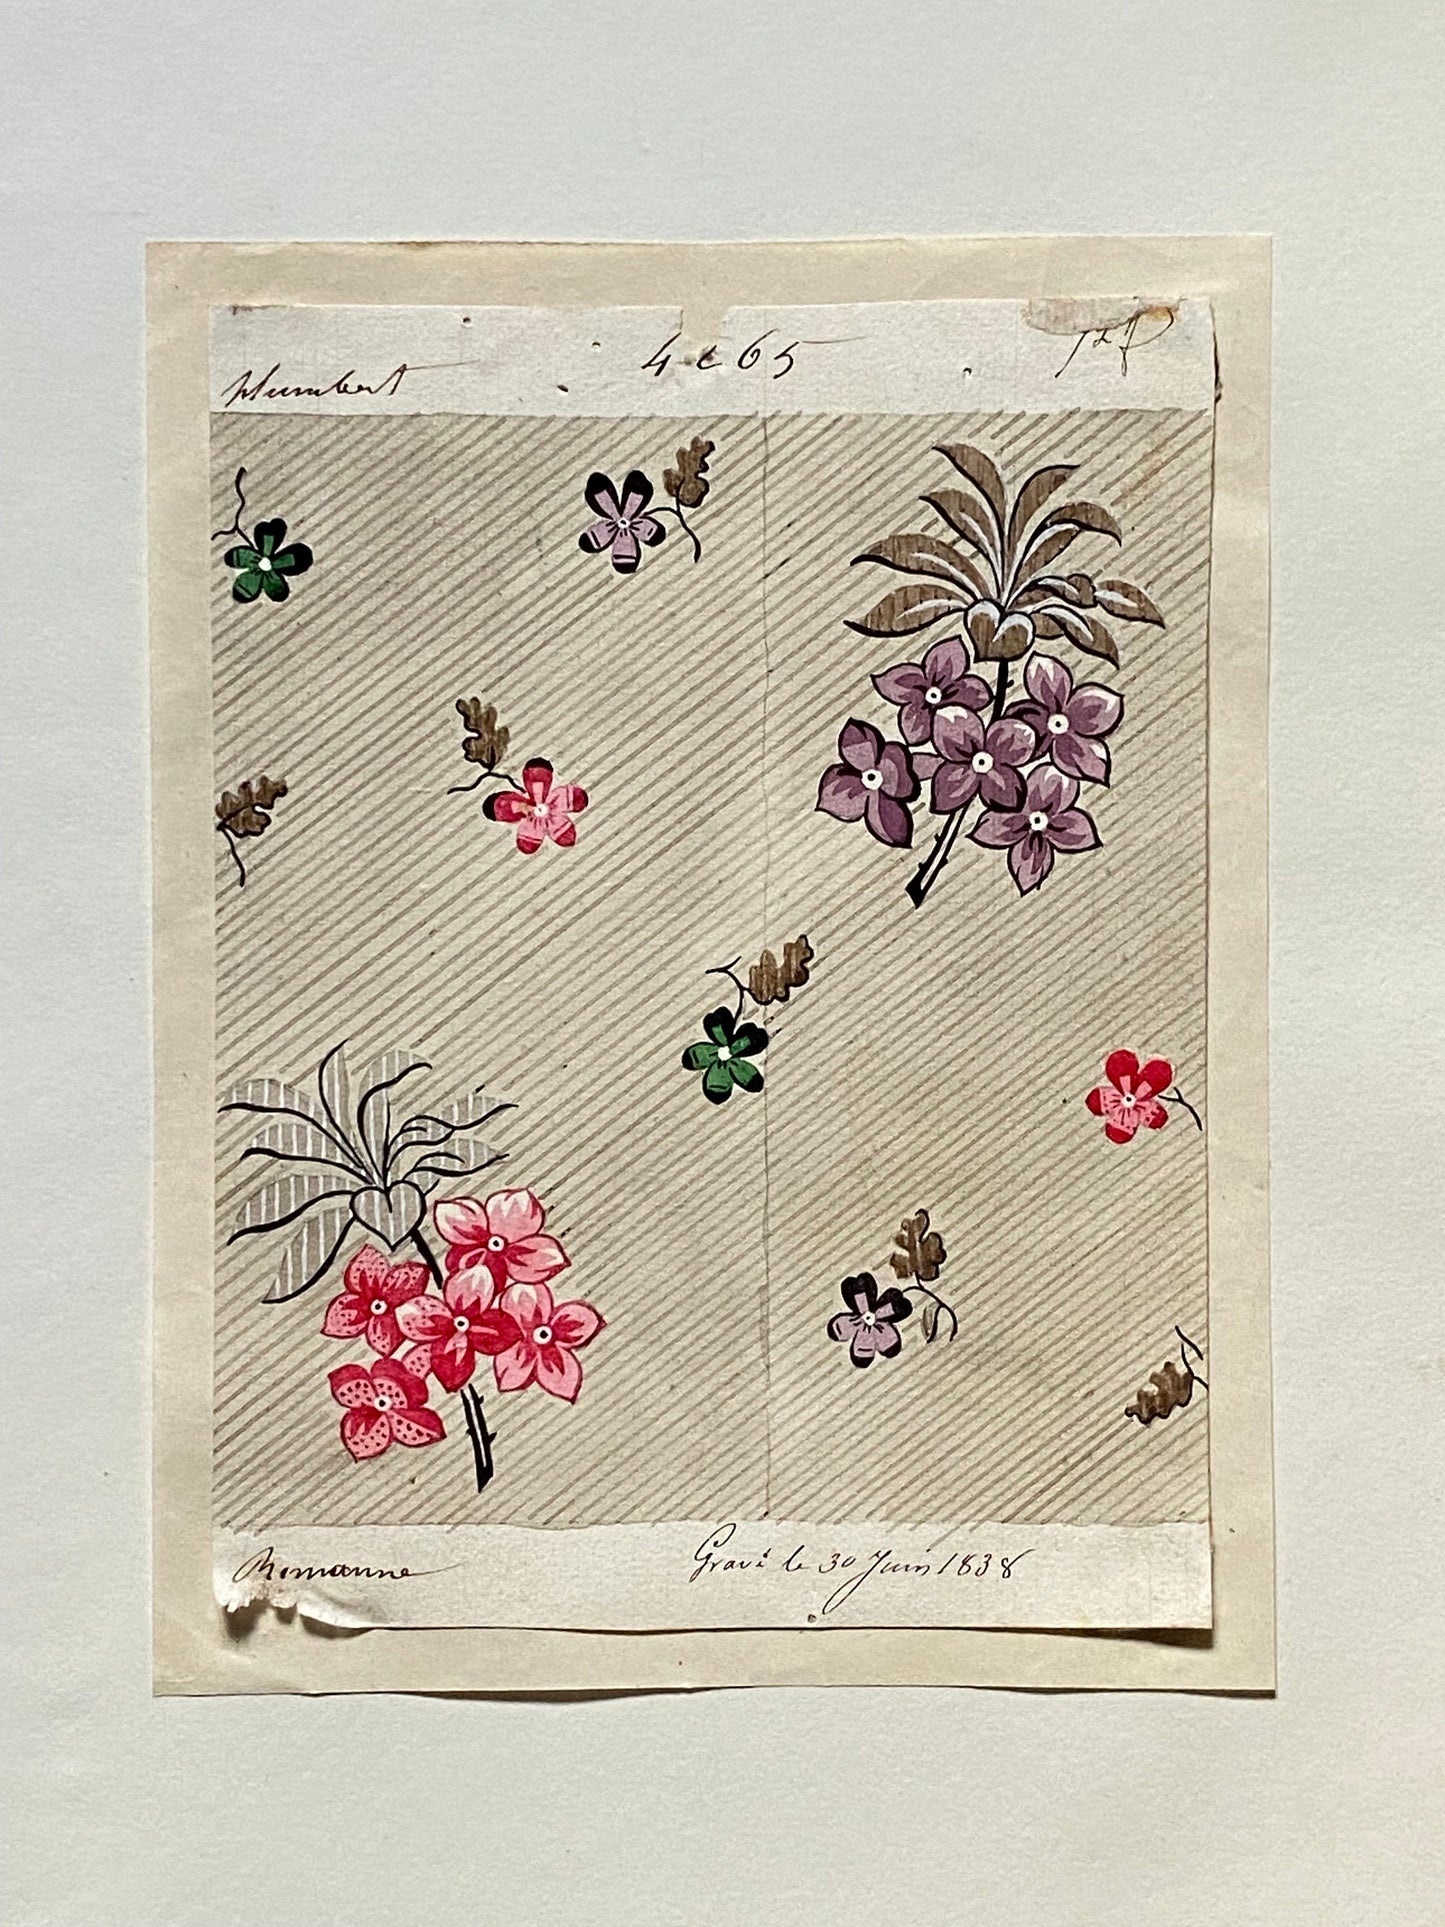 A Genuine 19th Century French Textile Design. Dated 1838. Mounted on Antique Paper. Size: 12 x 16 cm